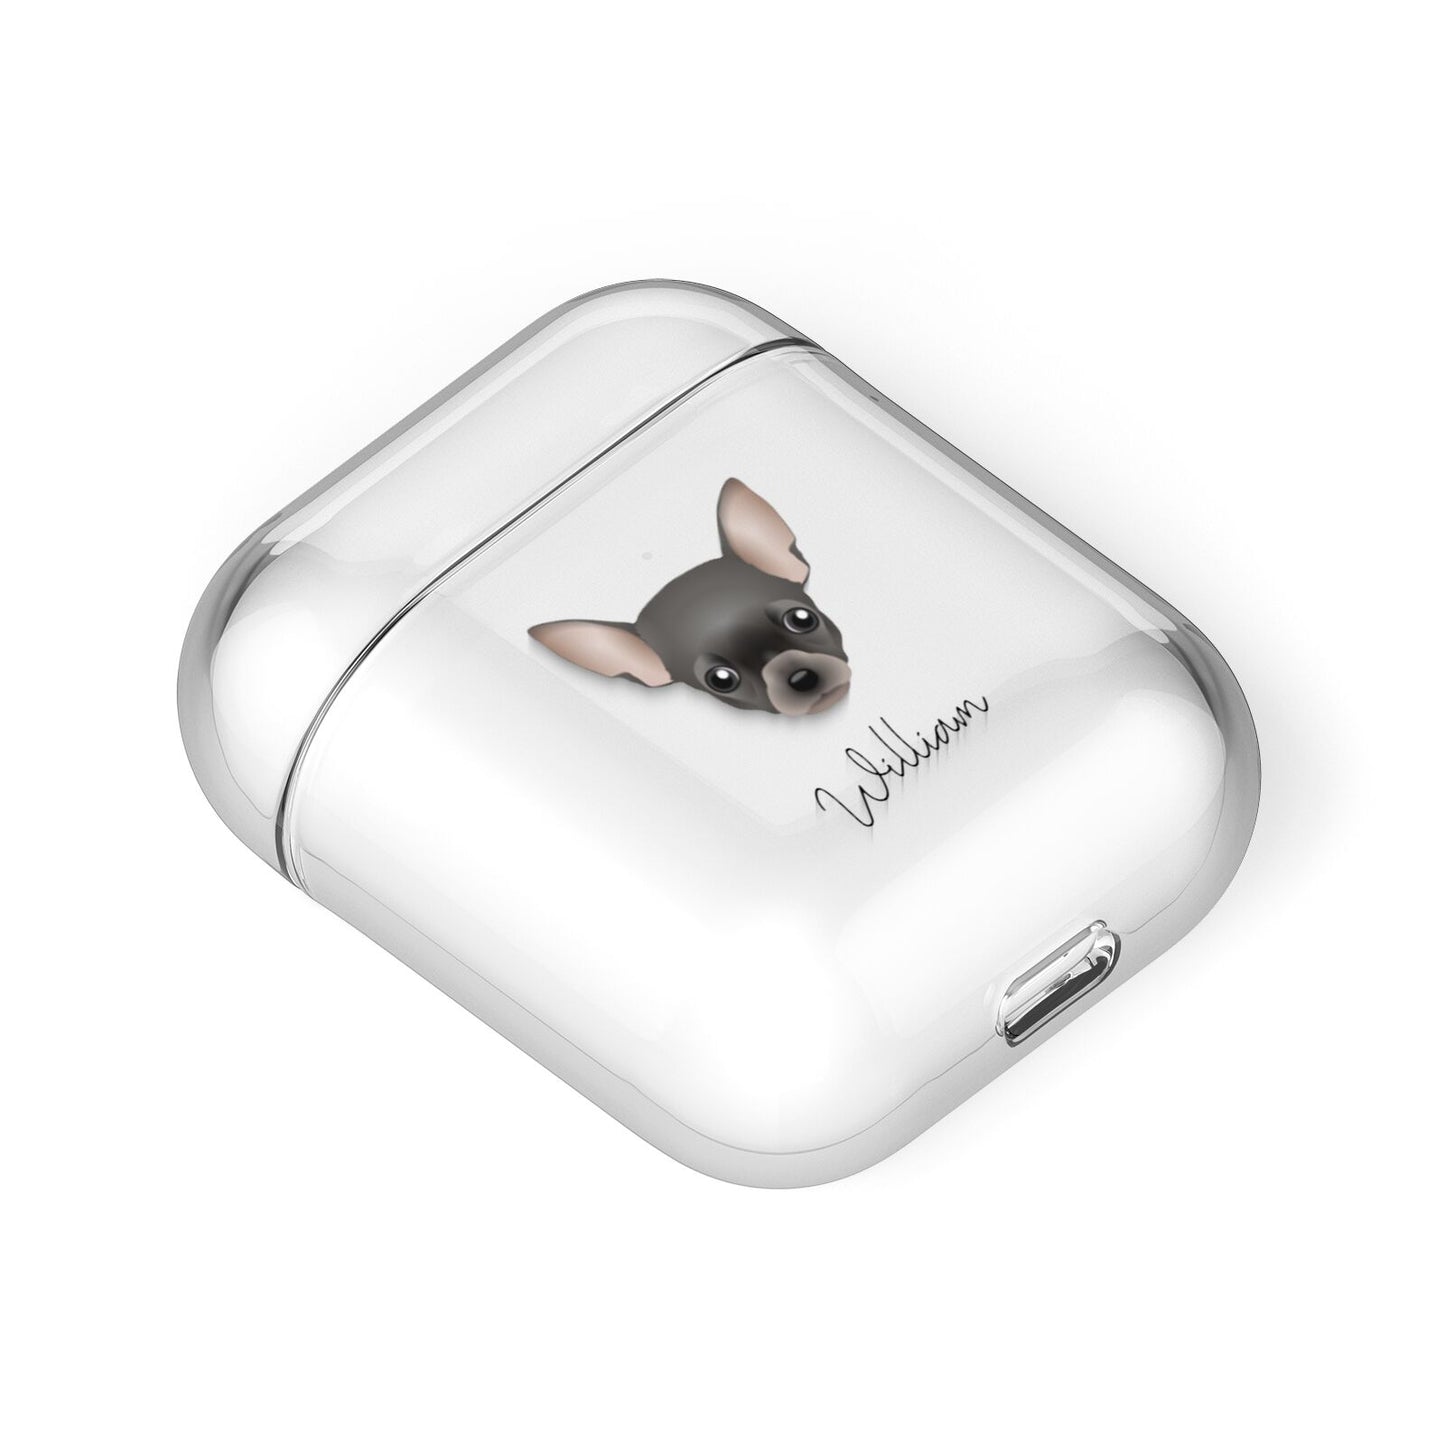 Chihuahua Personalised AirPods Case Laid Flat